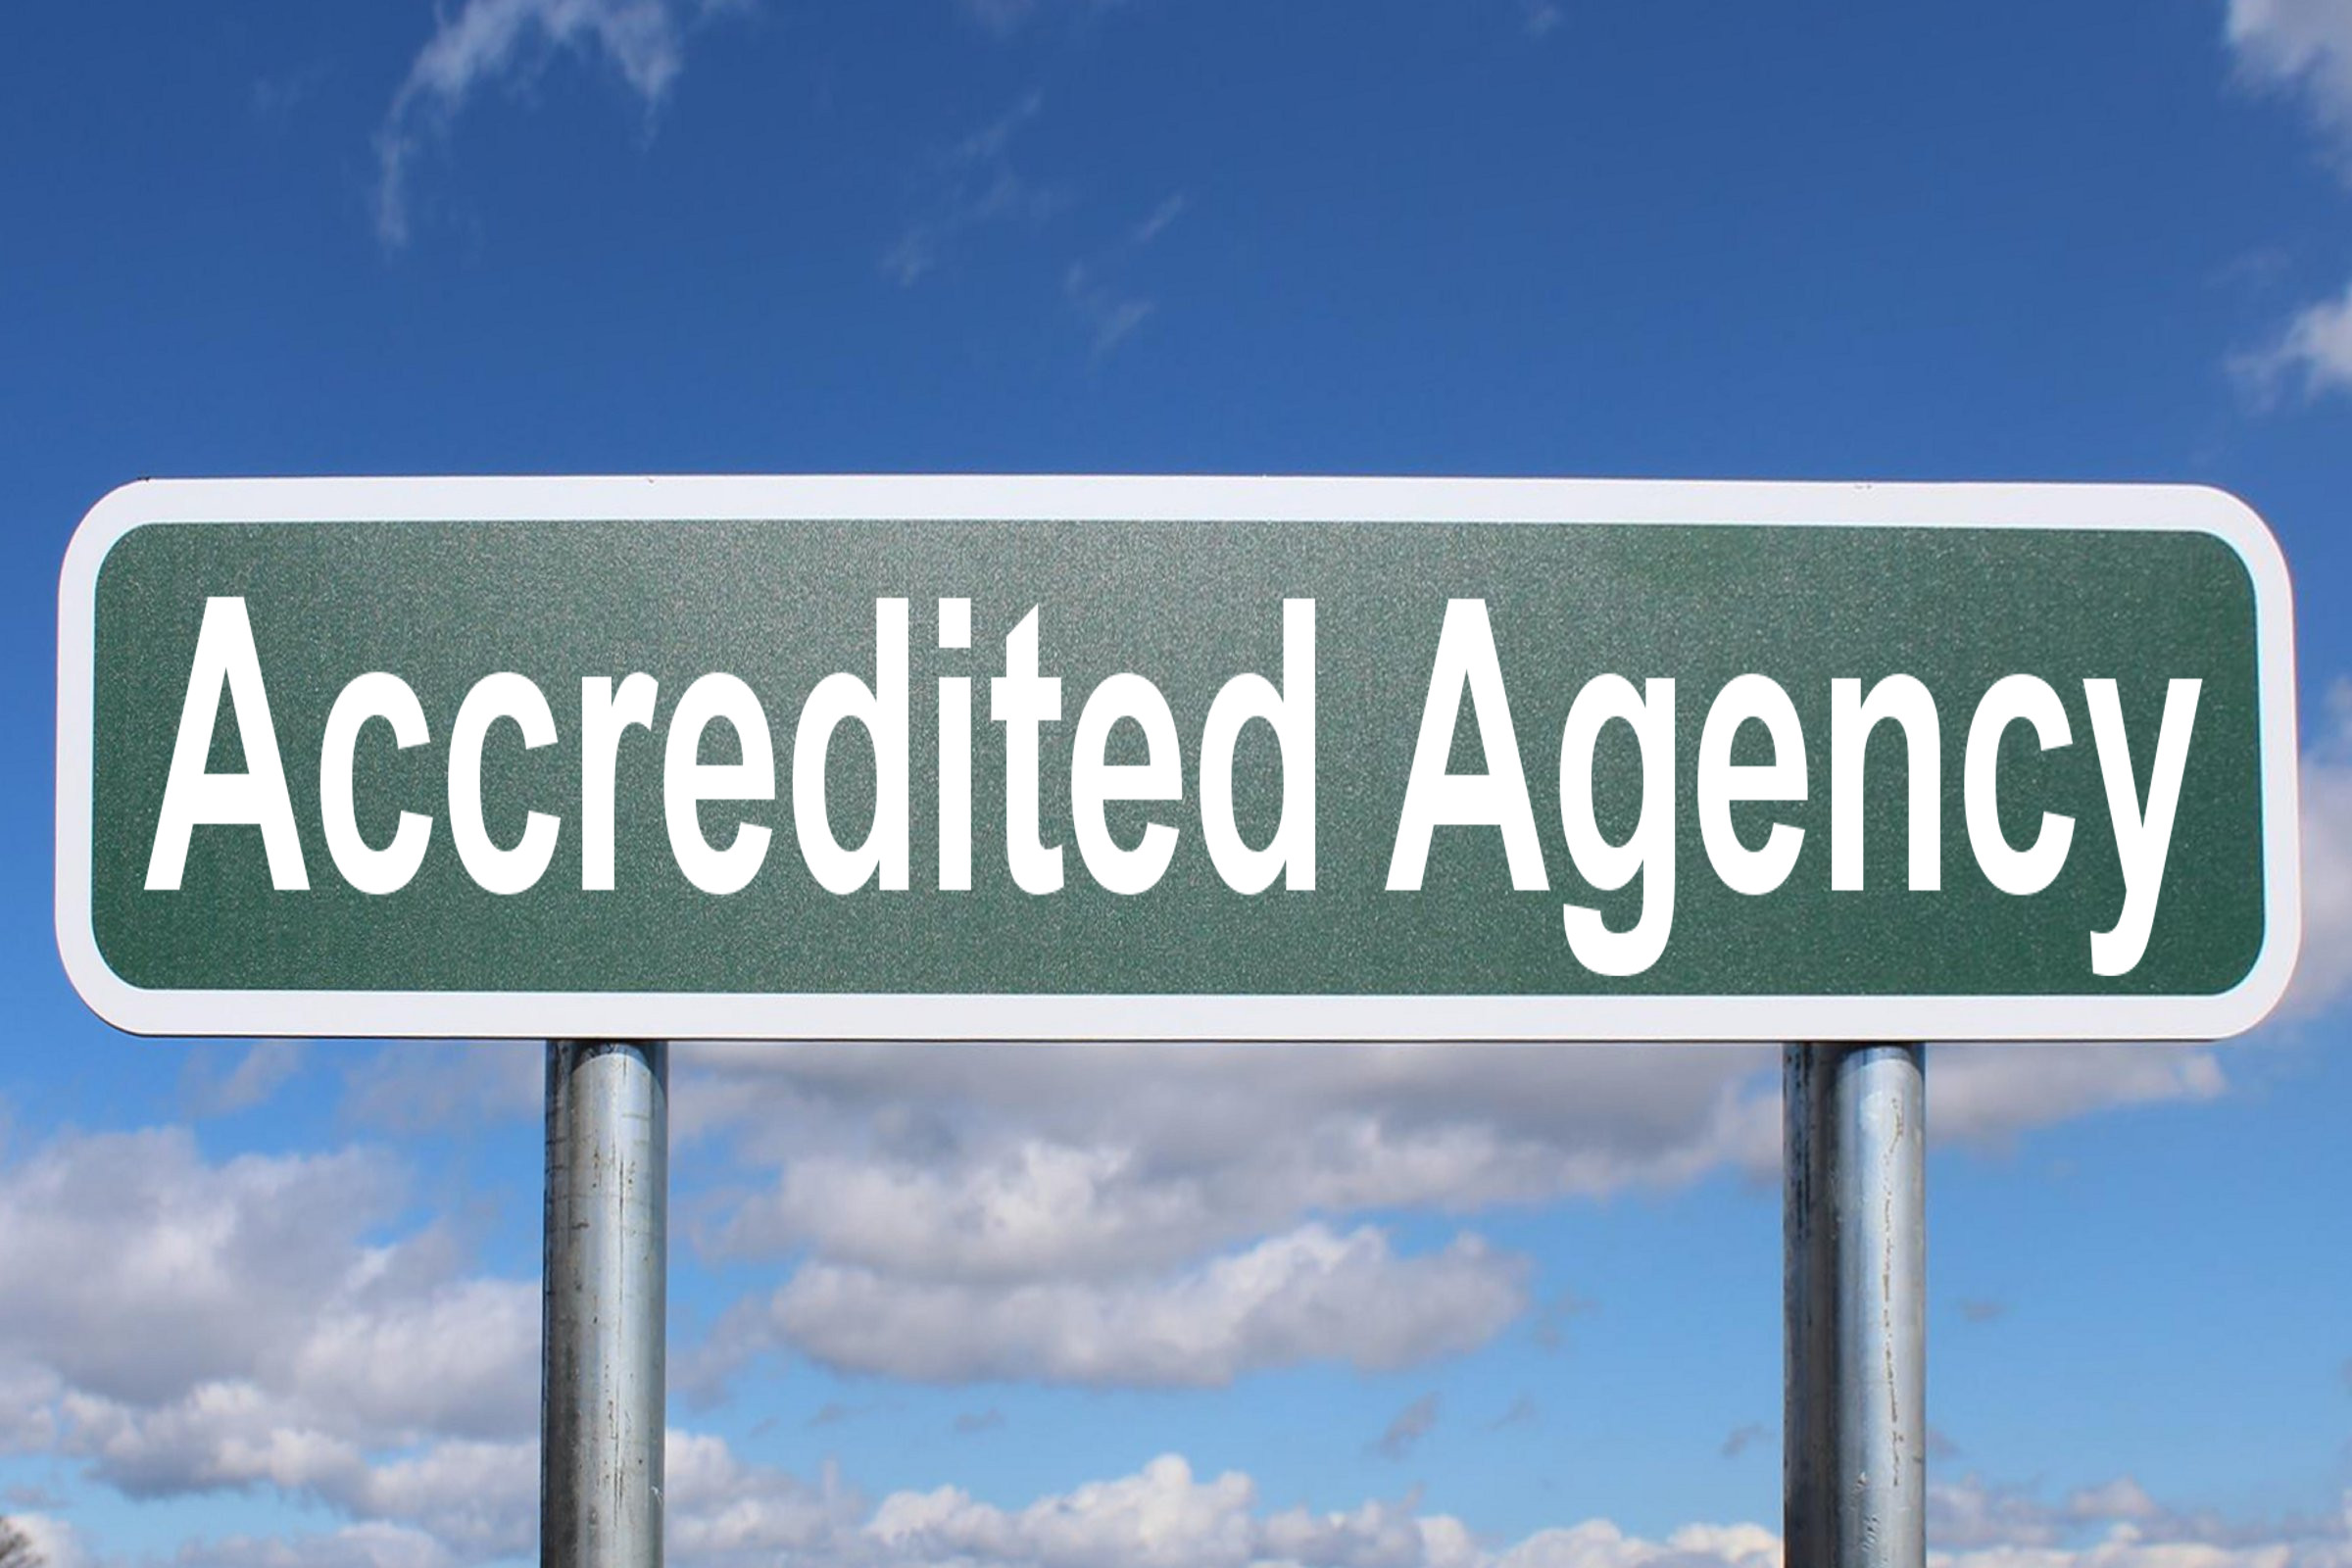 accredited agency